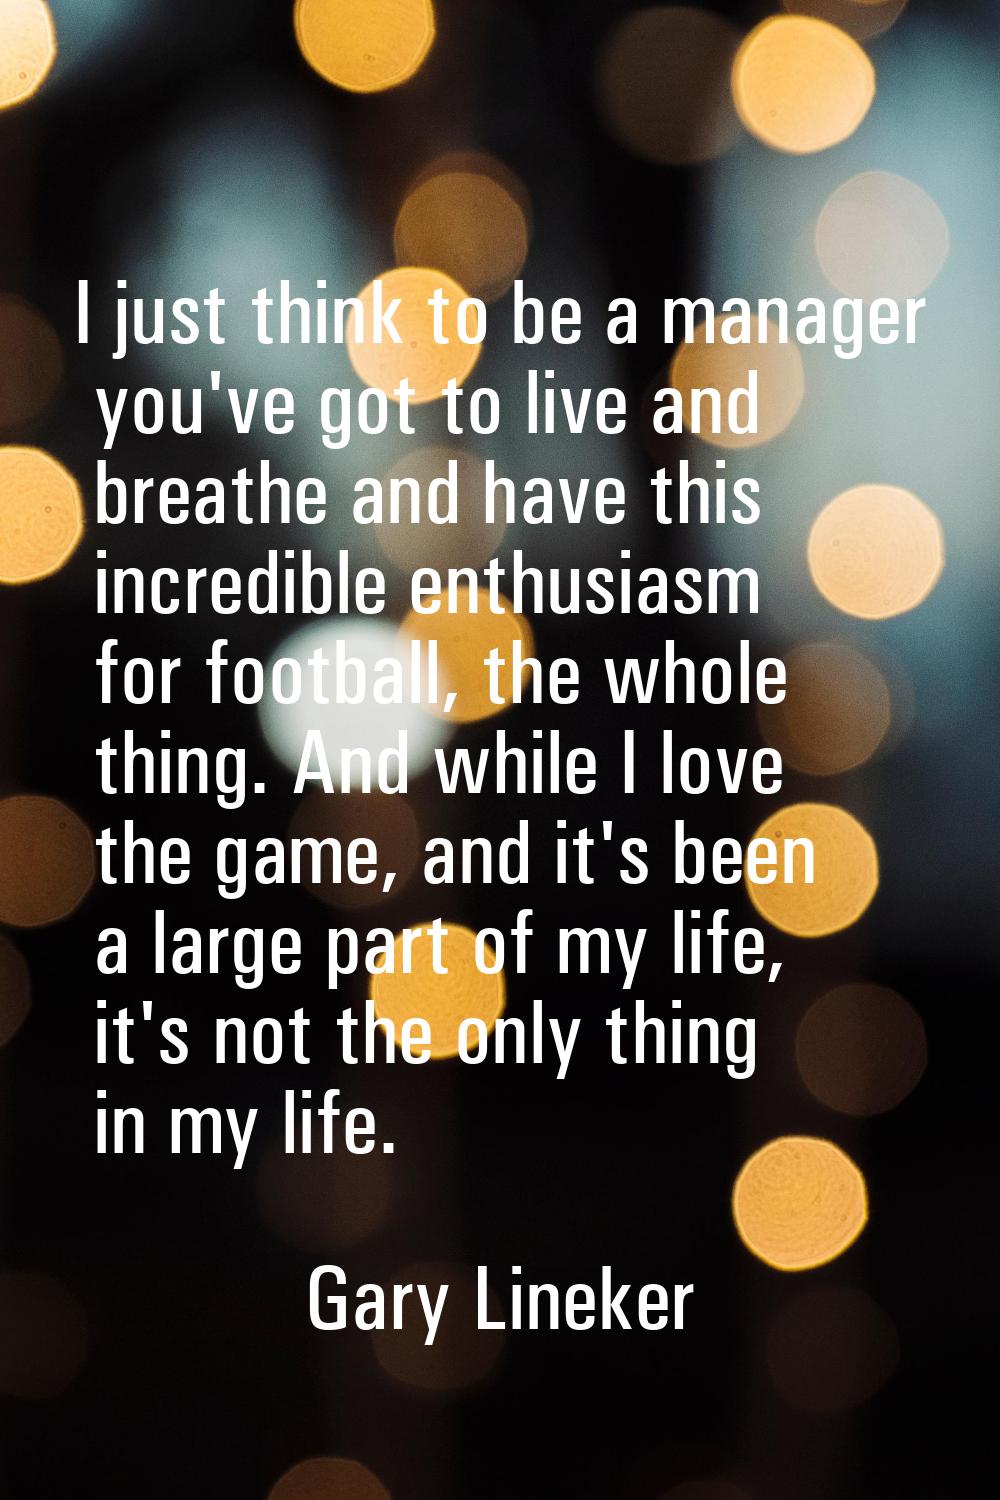 I just think to be a manager you've got to live and breathe and have this incredible enthusiasm for